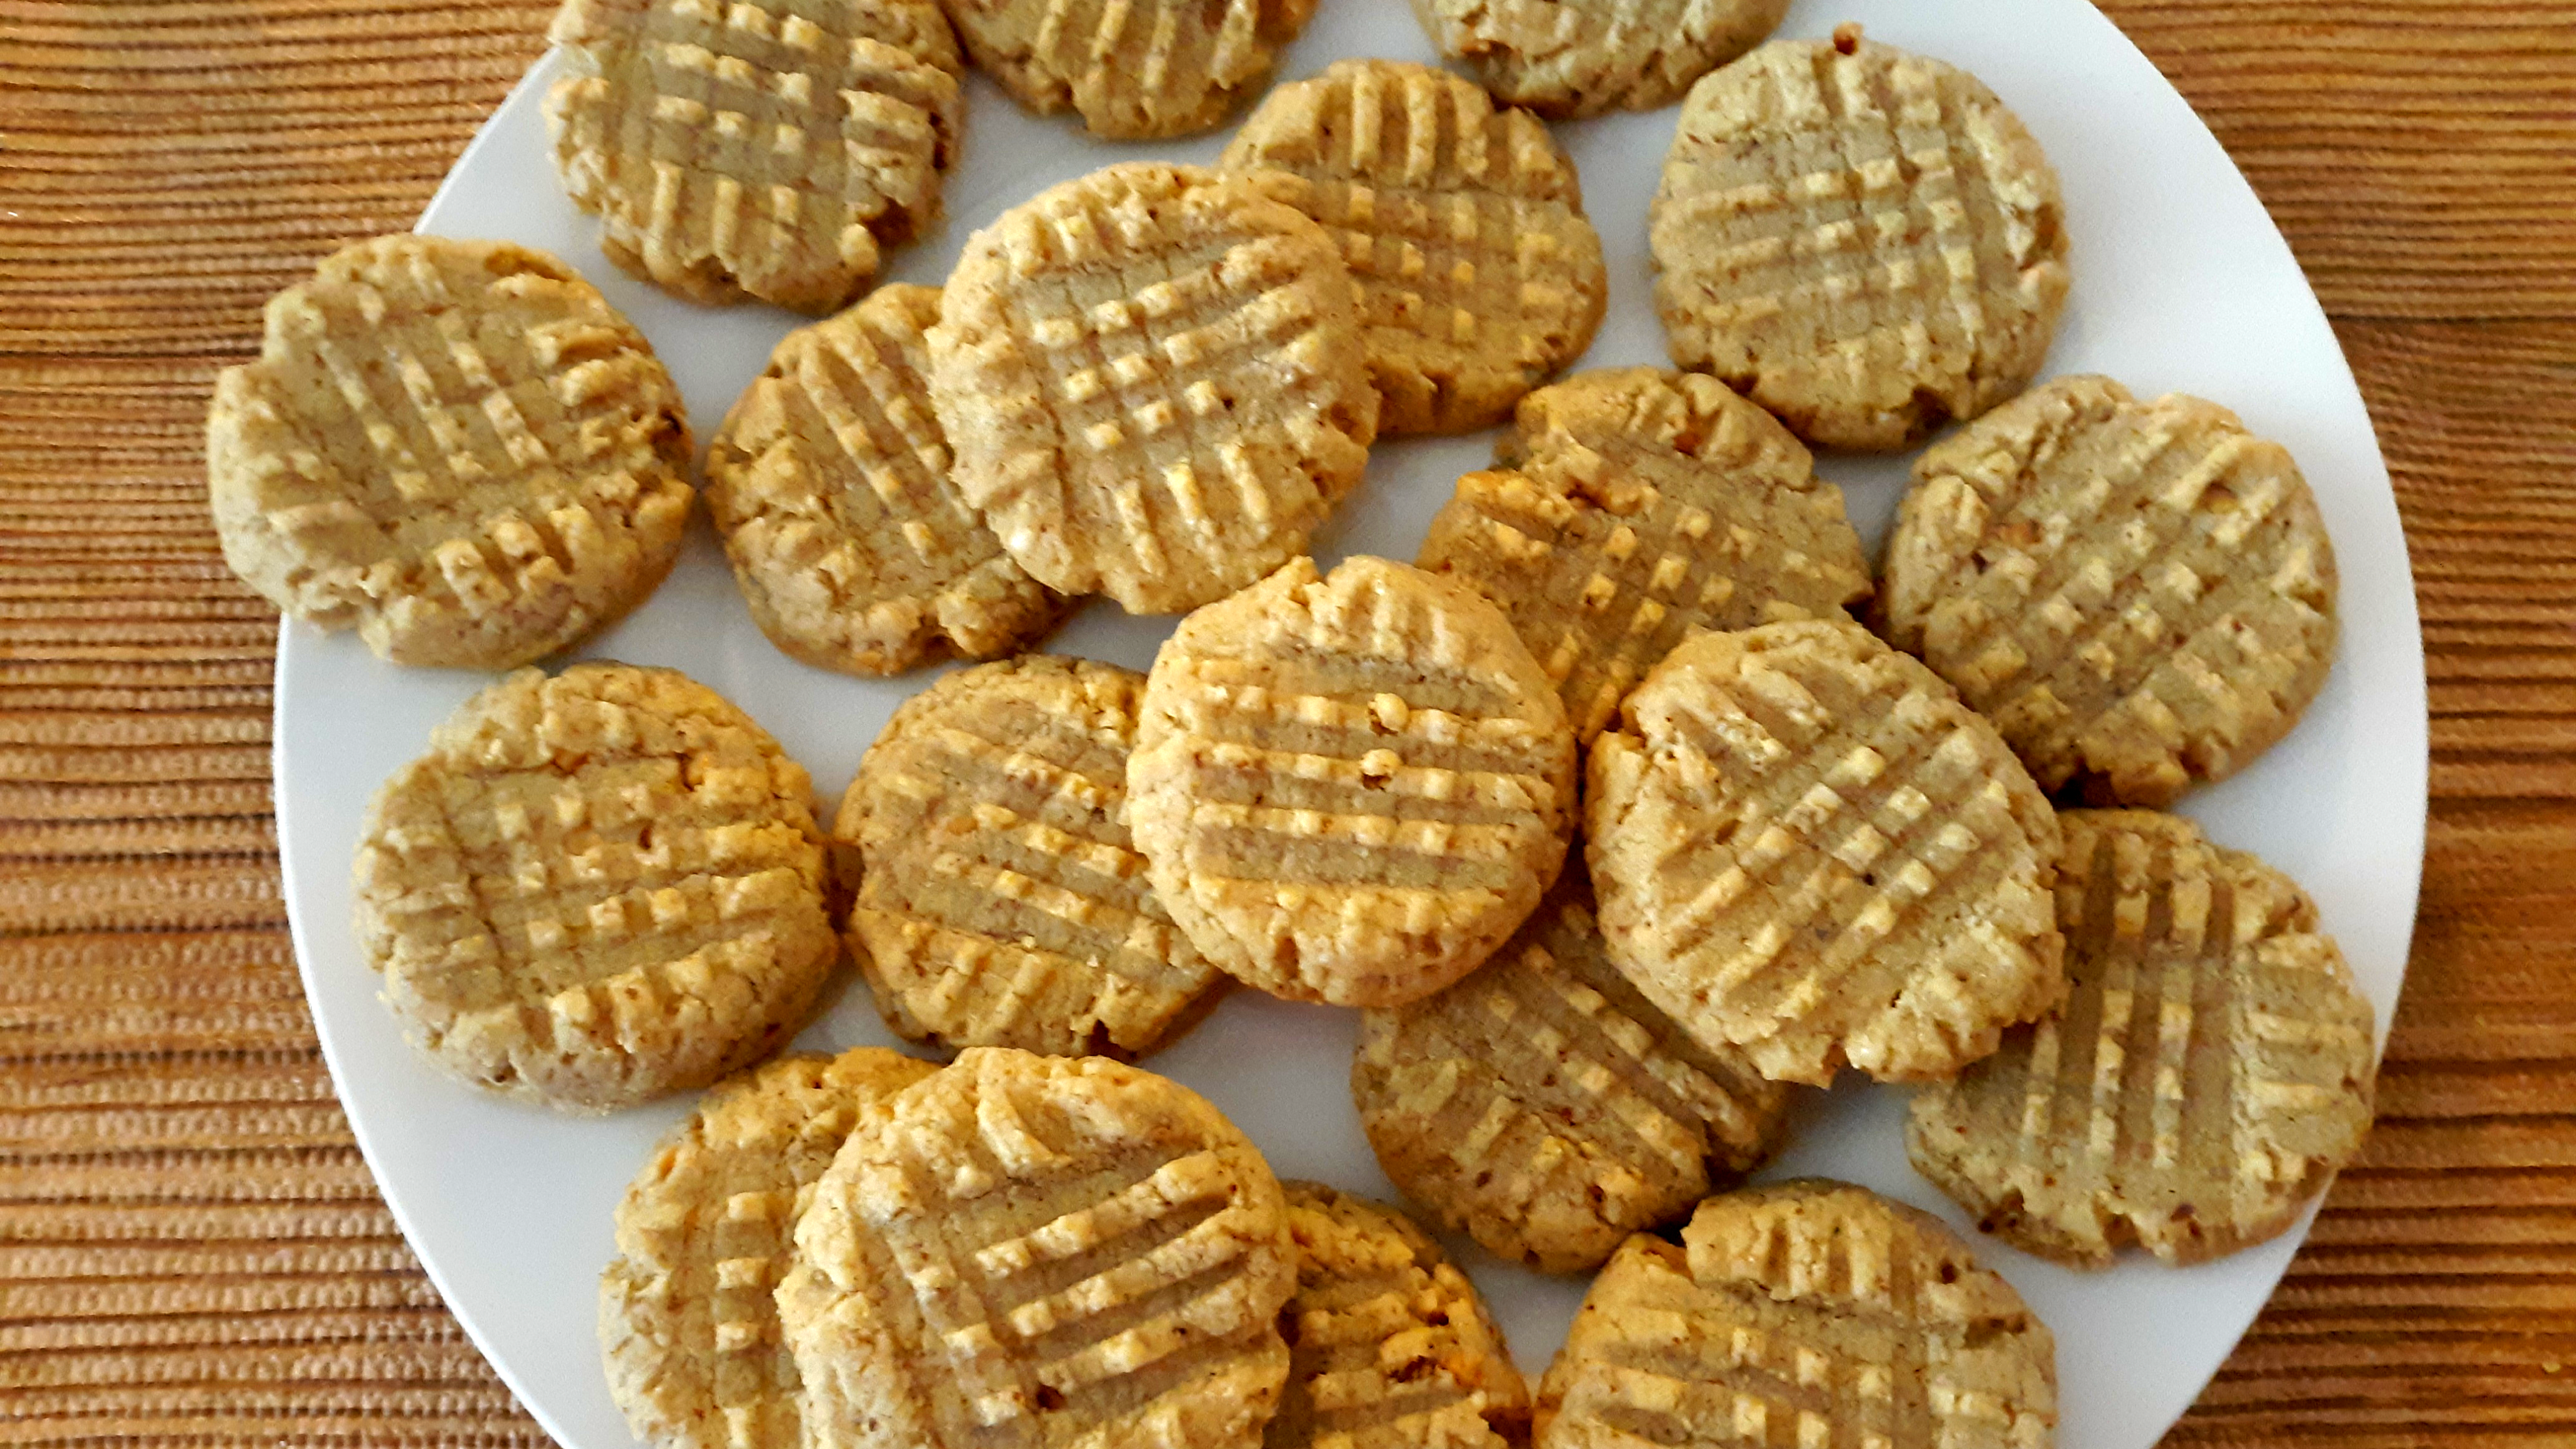 LOW CARB SUGAR FREE PEANUT BUTTER COOKIES